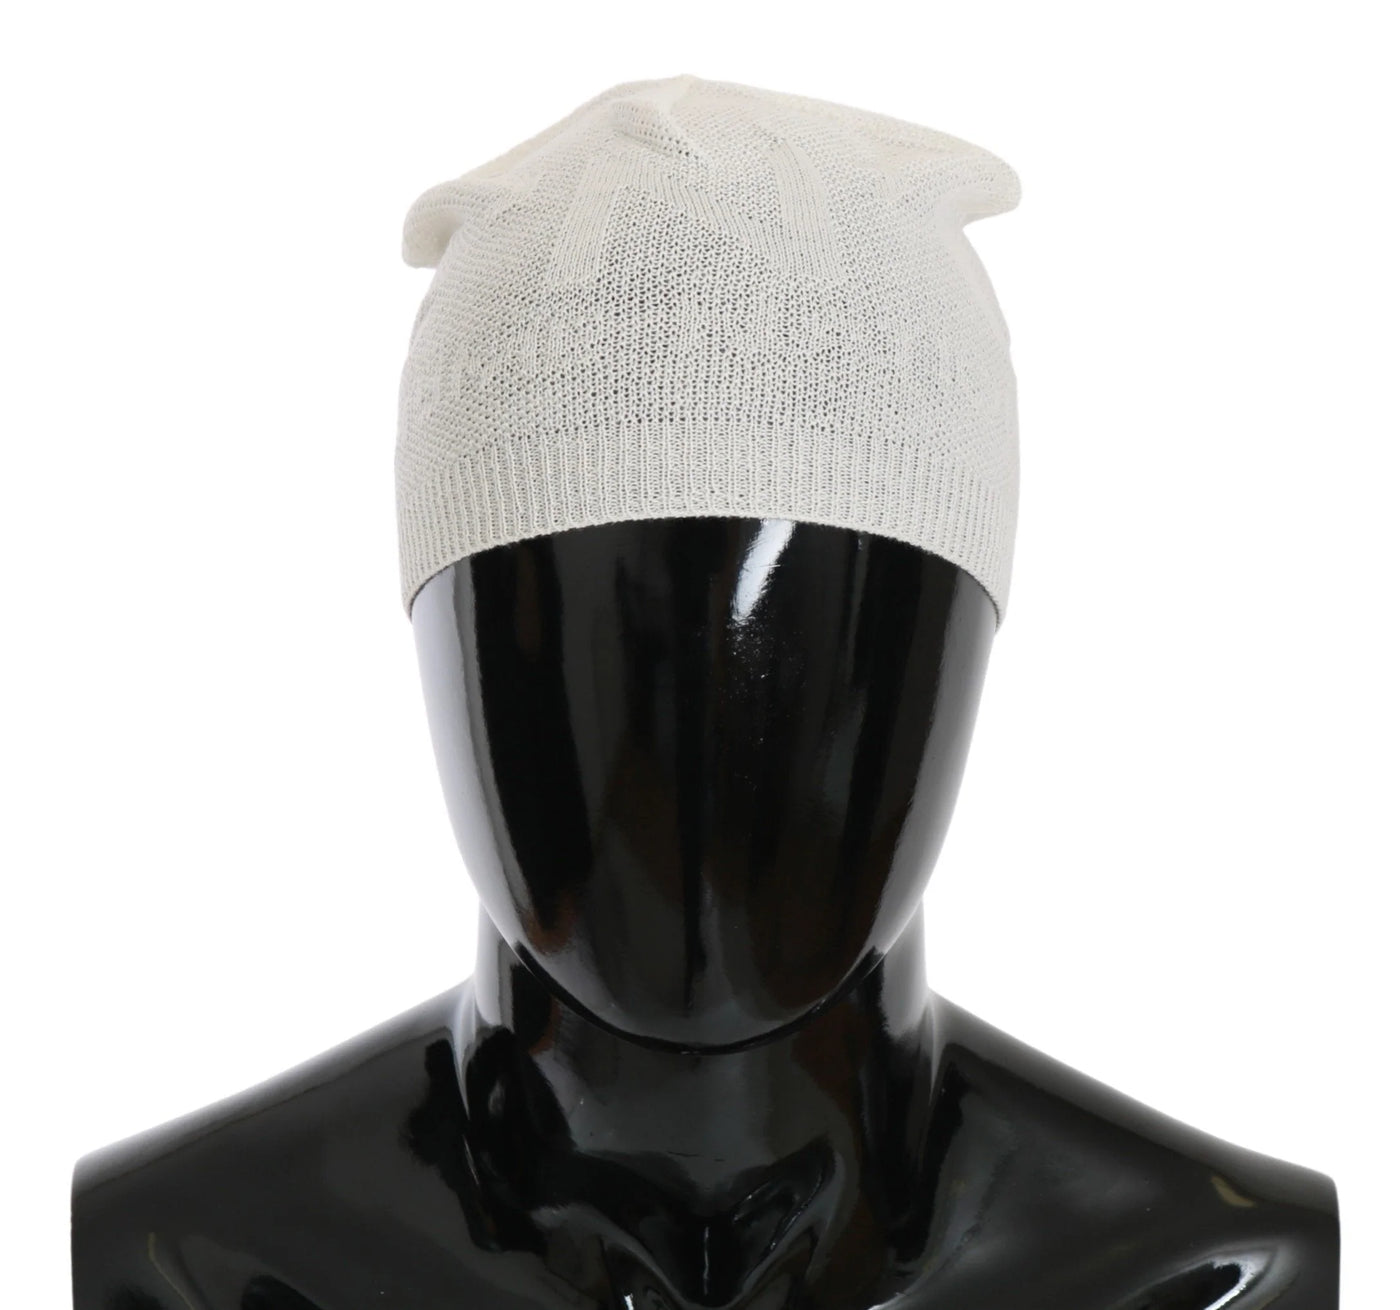 Dolce & Gabbana Beanie White Wool Blend Branded Hat #men, Accessories - New Arrivals, Brand_Dolce & Gabbana, Catch, Dolce & Gabbana, feed-agegroup-adult, feed-color-white, feed-gender-male, feed-size-OS, Gender_Men, Hats & Caps - Men - Accessories, Kogan, White at SEYMAYKA